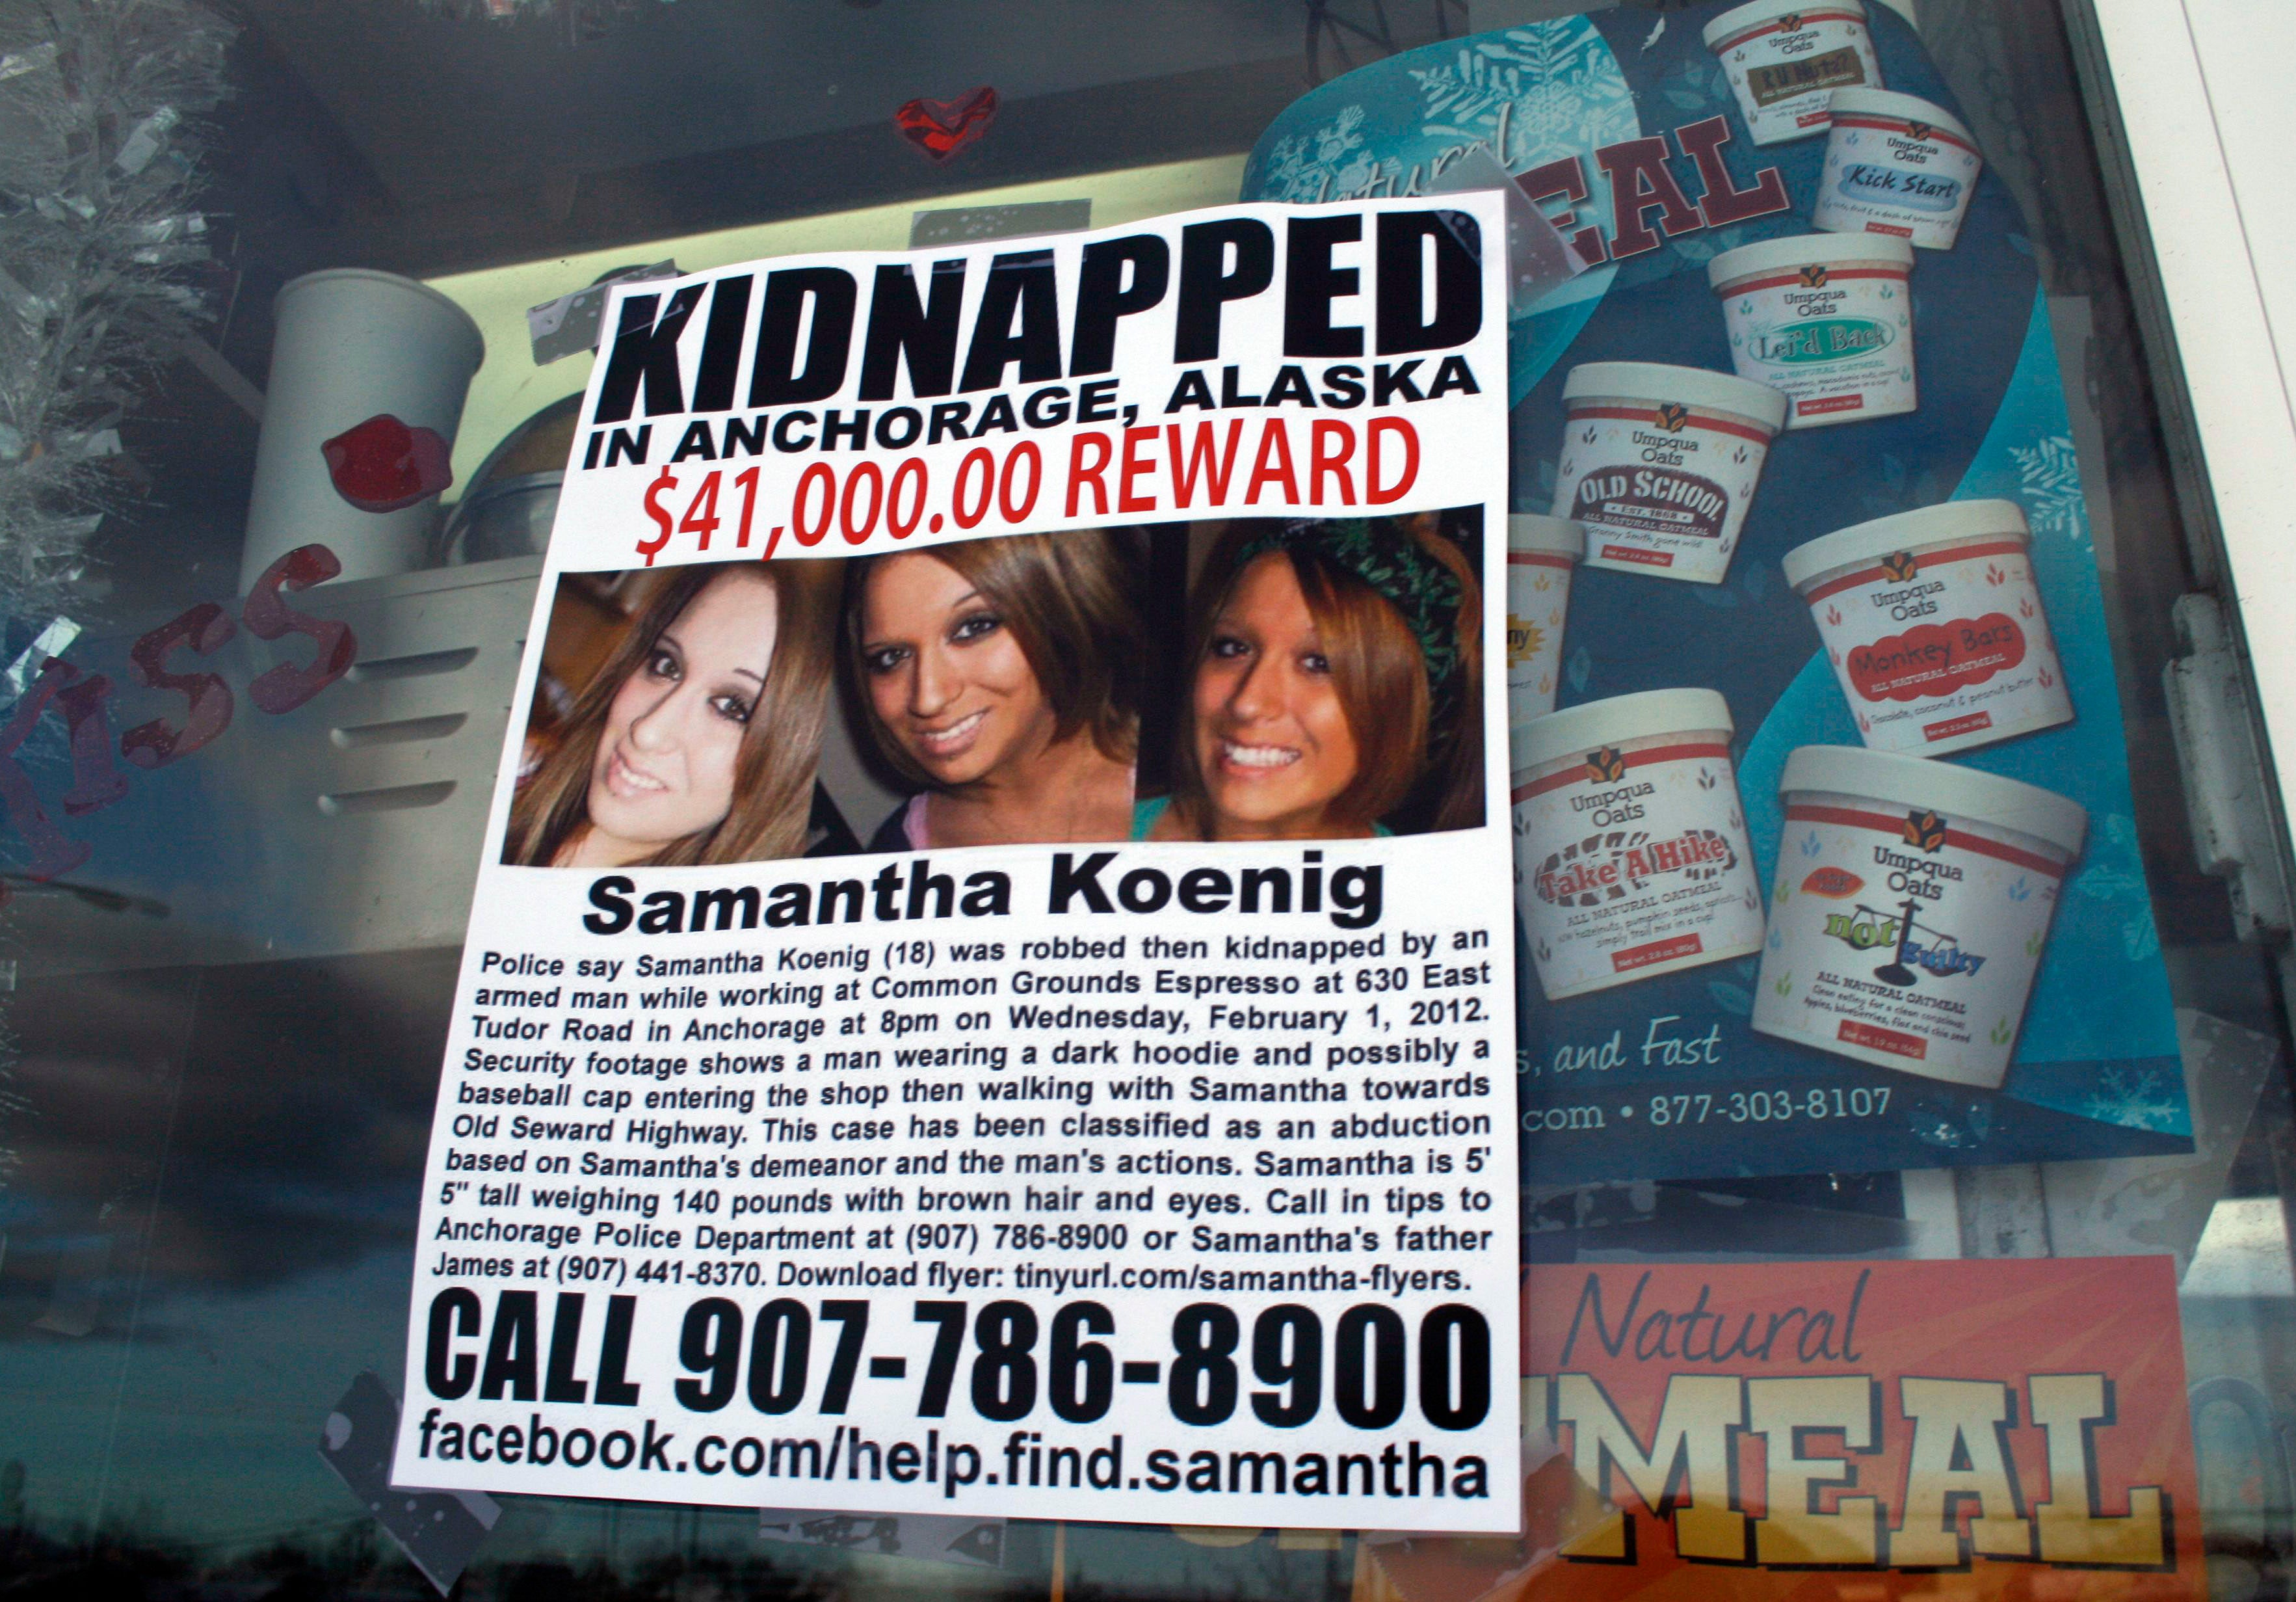 A missing person poster for Samantha Koenig is displayed on the window of the coffee shop from which Keyes abducted her in Alaska